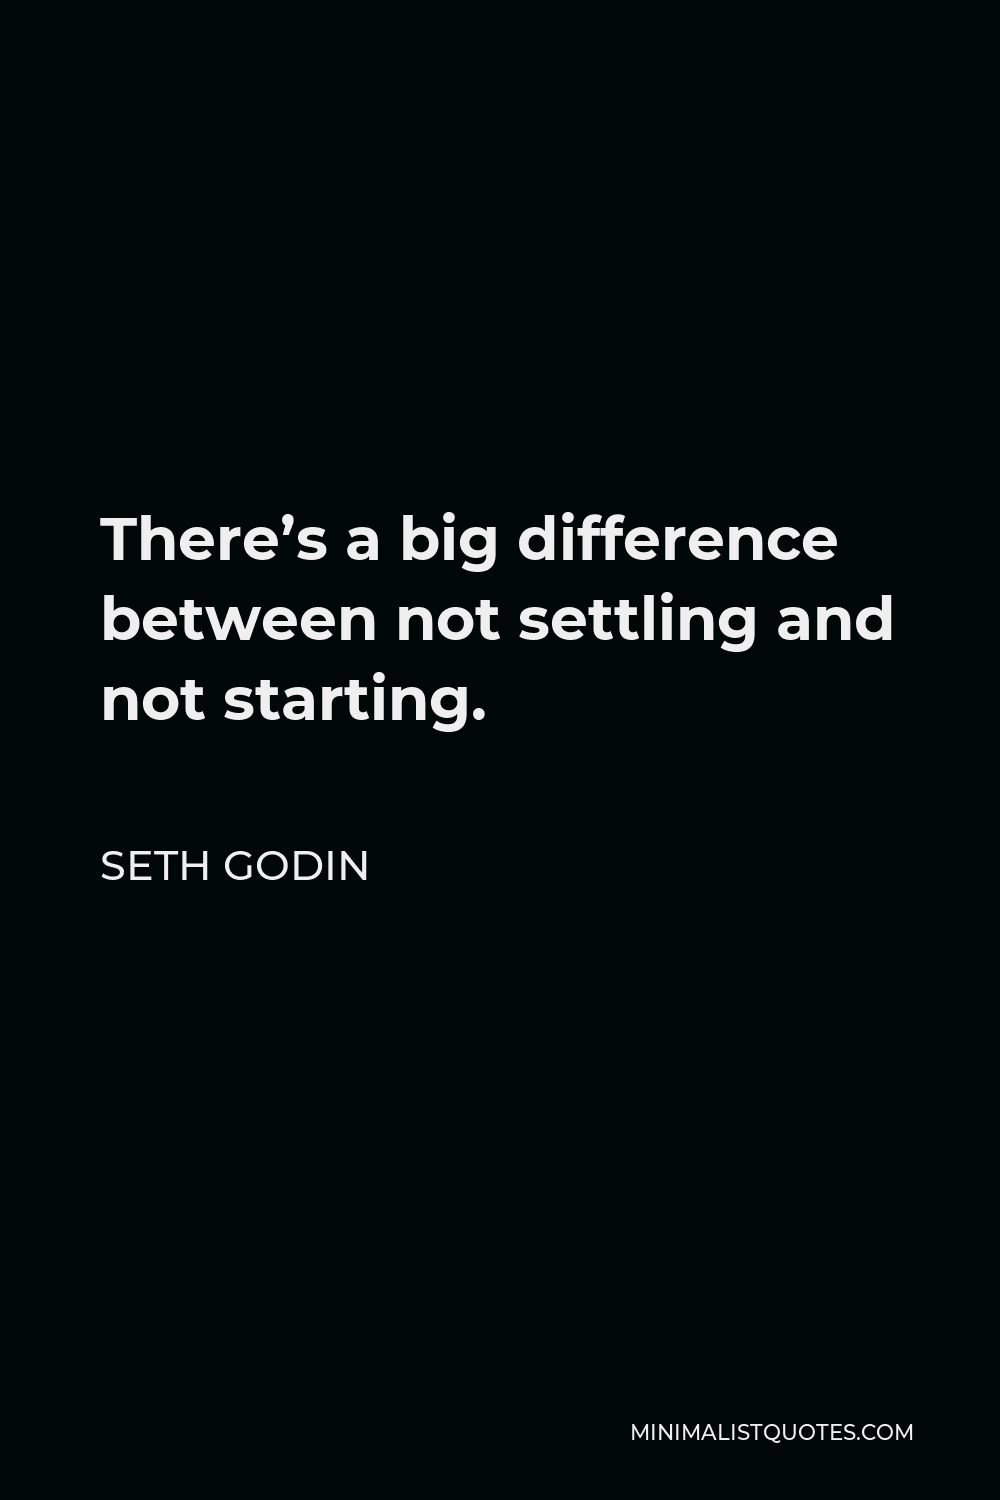 Seth Godin Quote - There’s a big difference between not settling and not starting.